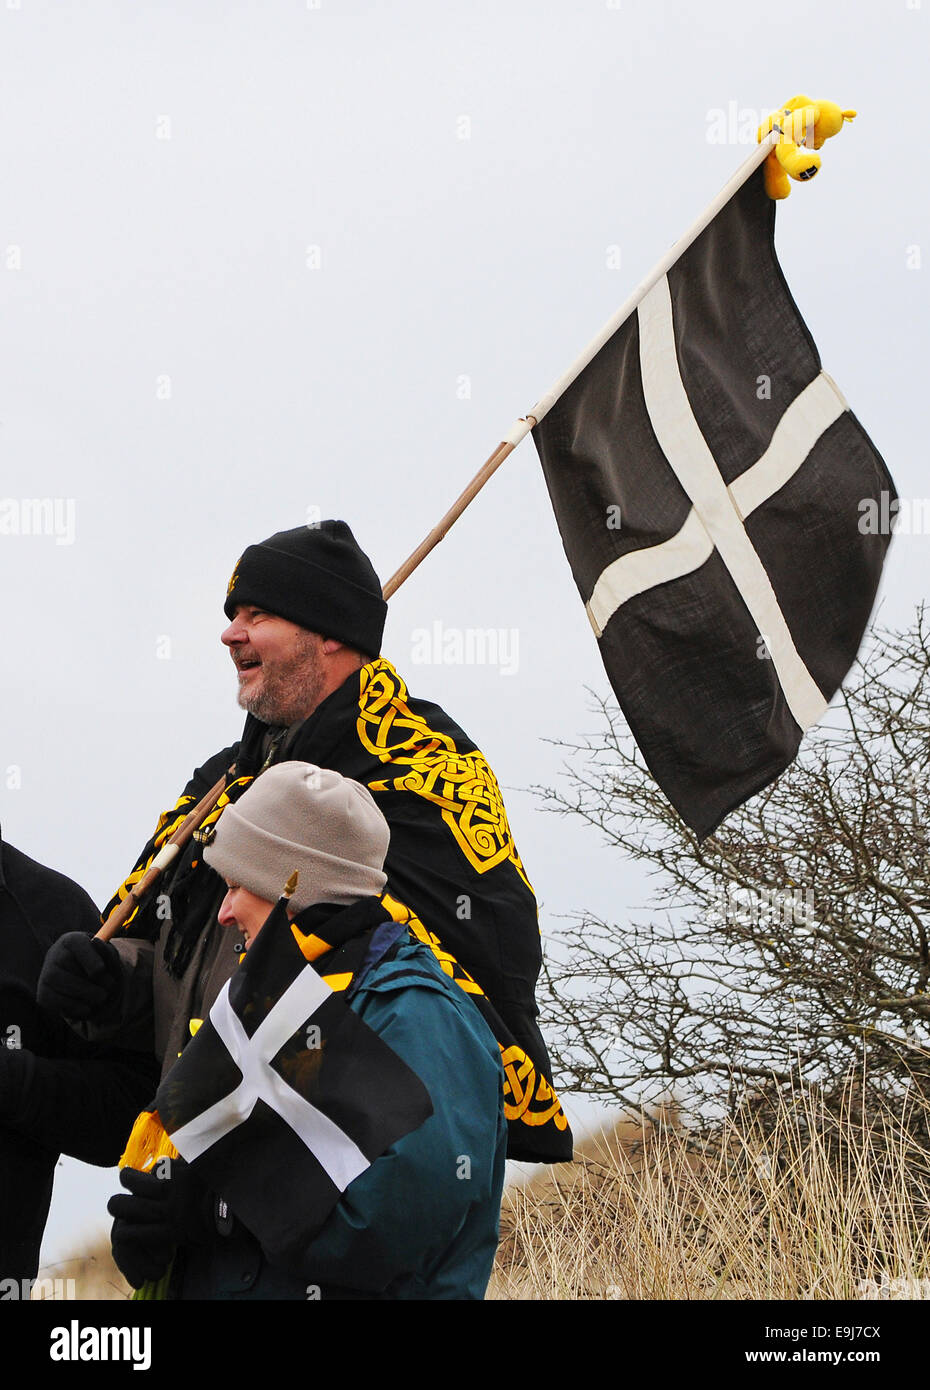 People carrying the Cornish flag on St. Pirans day in Cornwall, UK Stock Photo